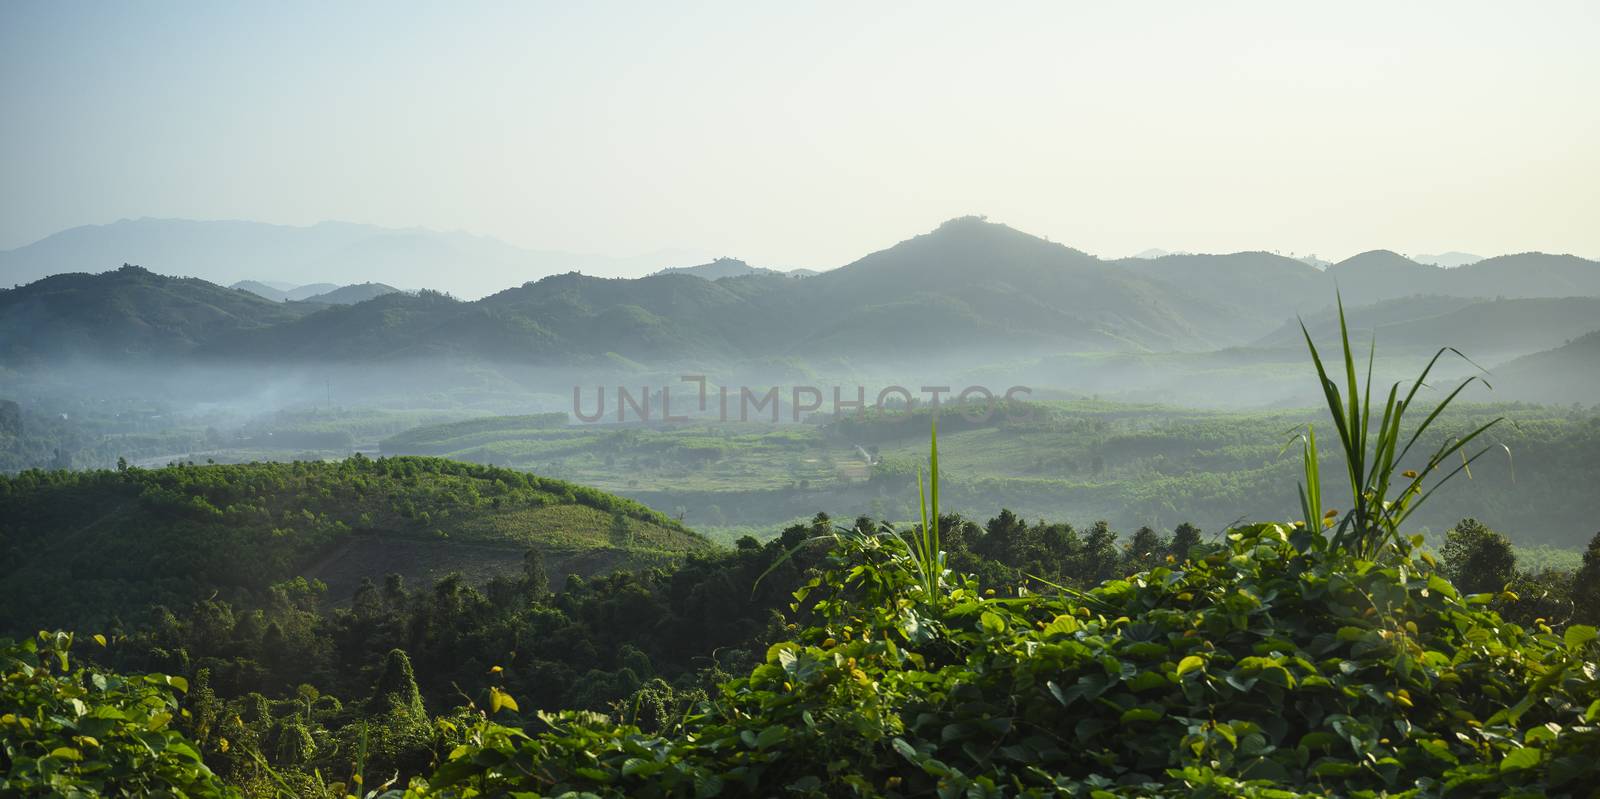 View of mountains and forests in the morning in fog in Vietnam.